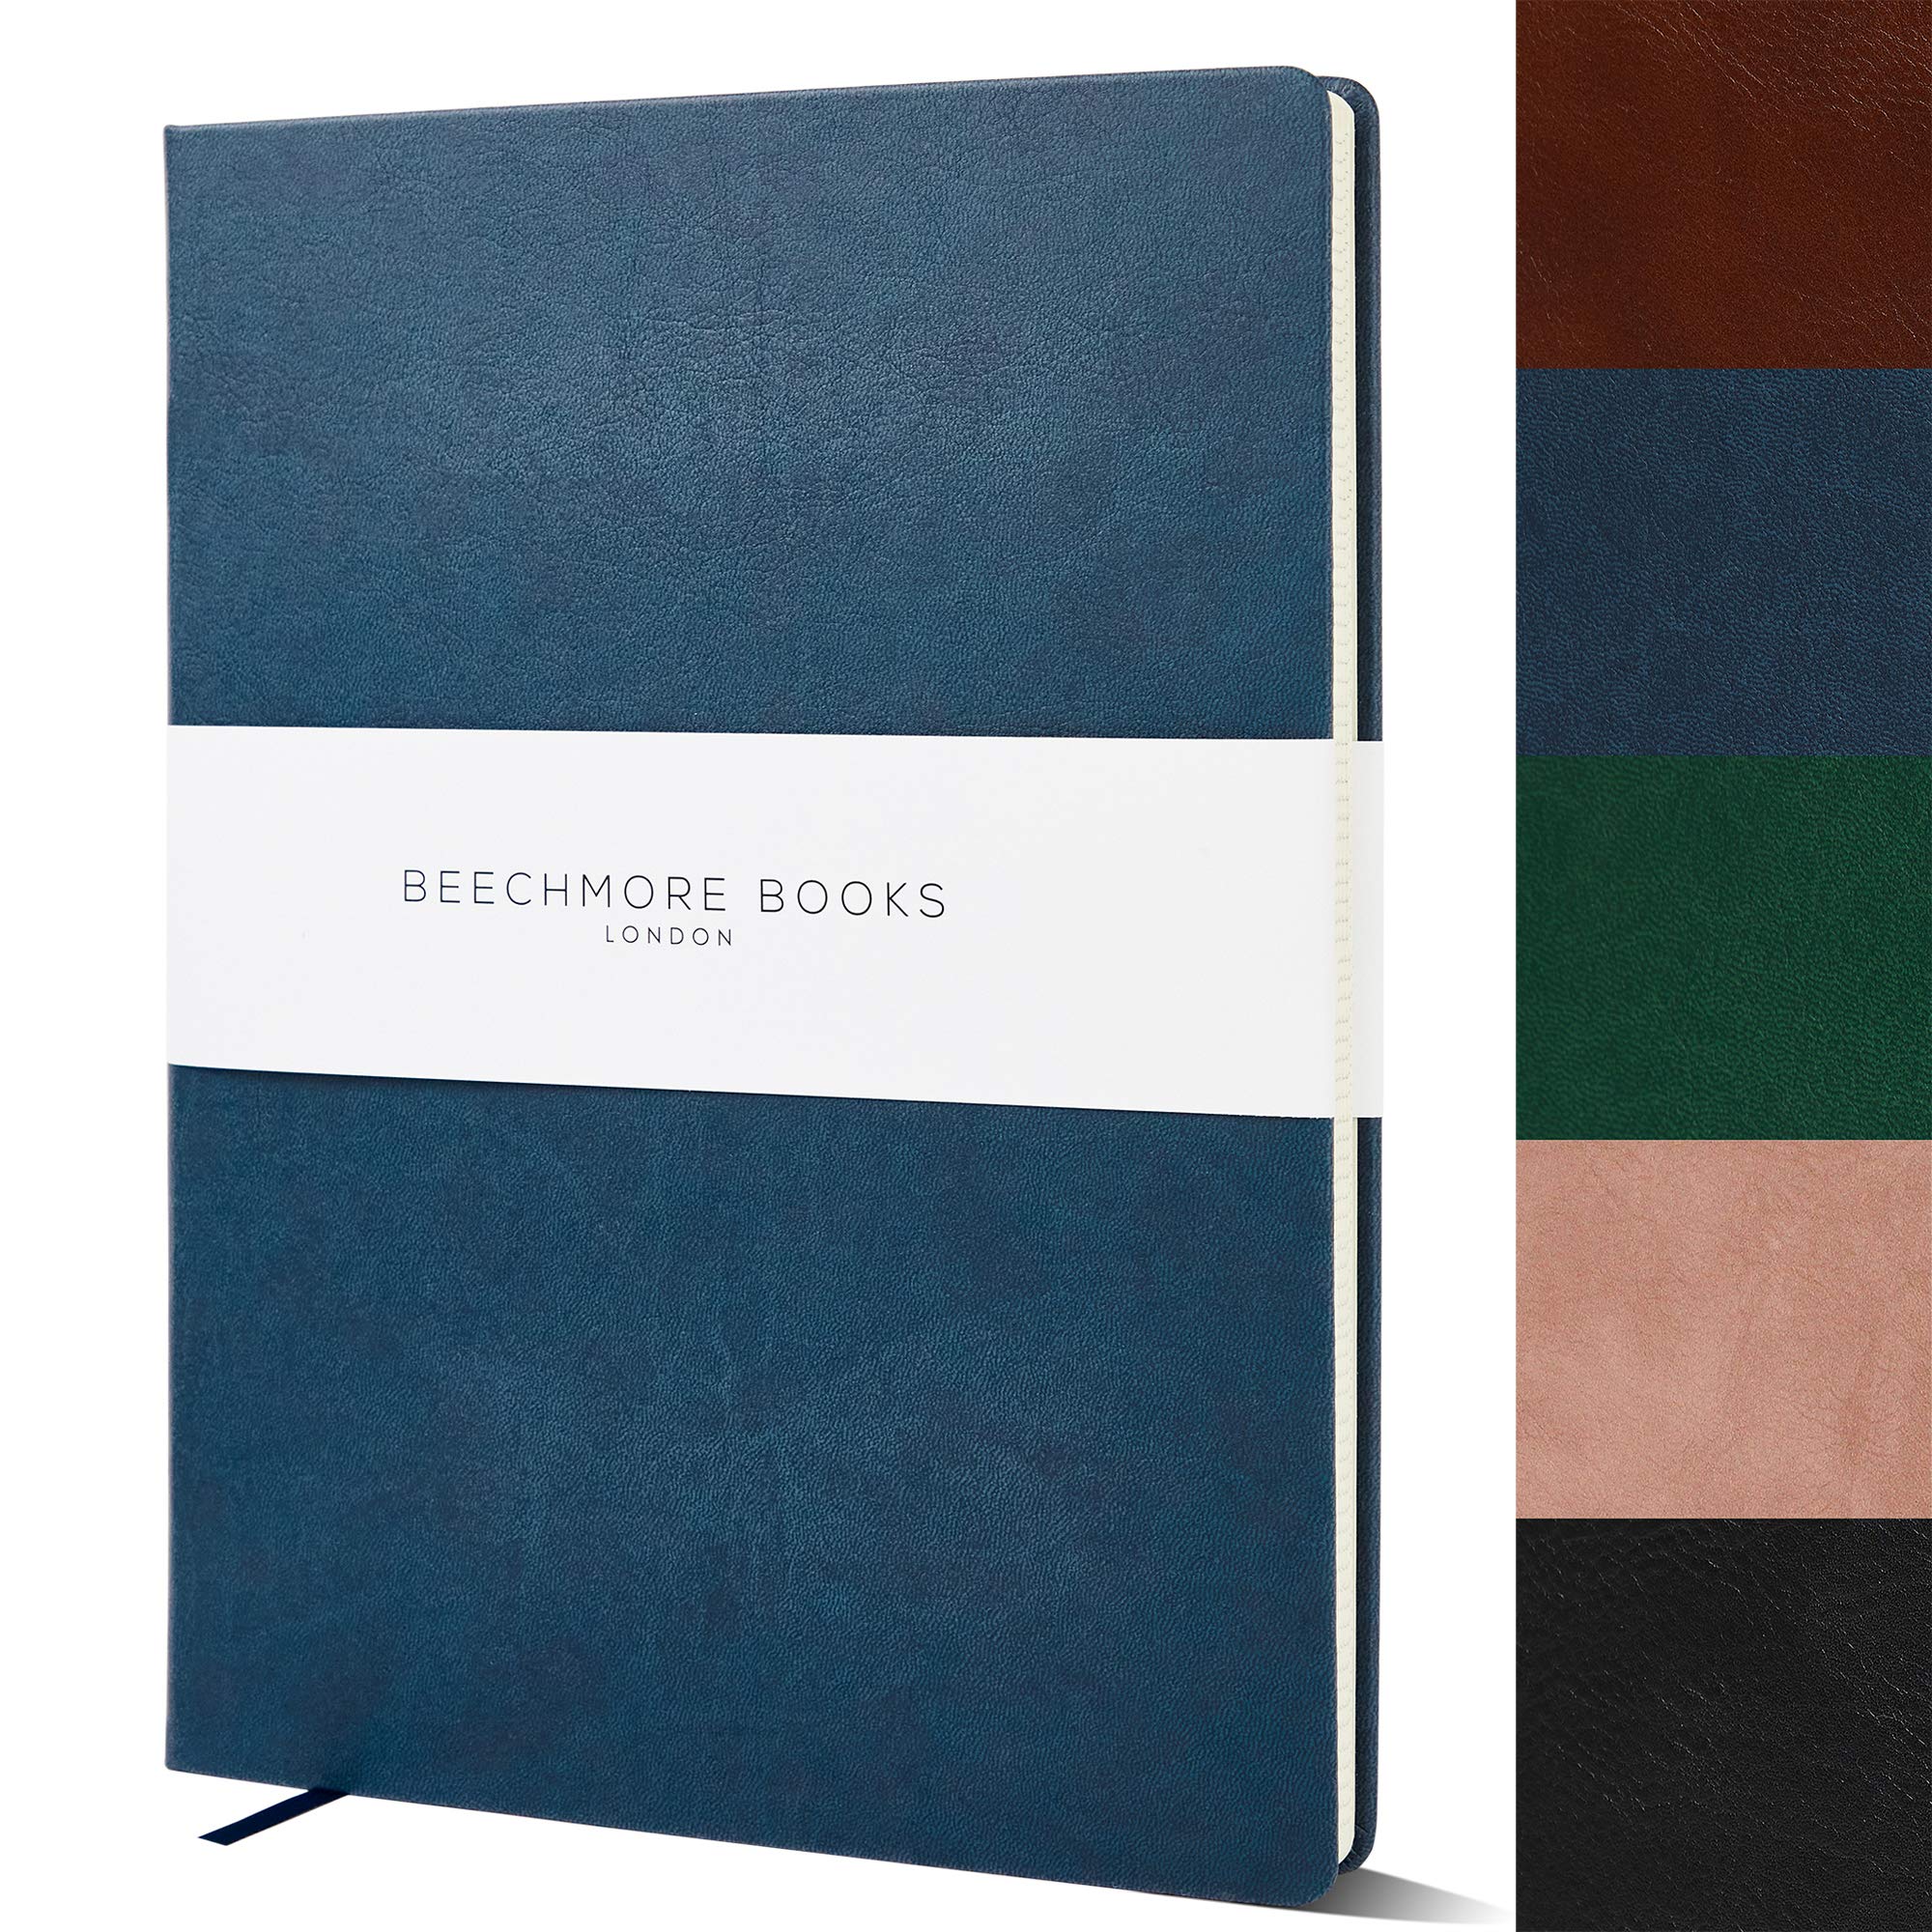 Ruled Notebook - British A4 Journal by Beechmore Books | XL 8.5 x 11.5 Hardcover Vegan Leather, Thick 120gsm Cream Lined Paper | Gift Box | Symphony Blue